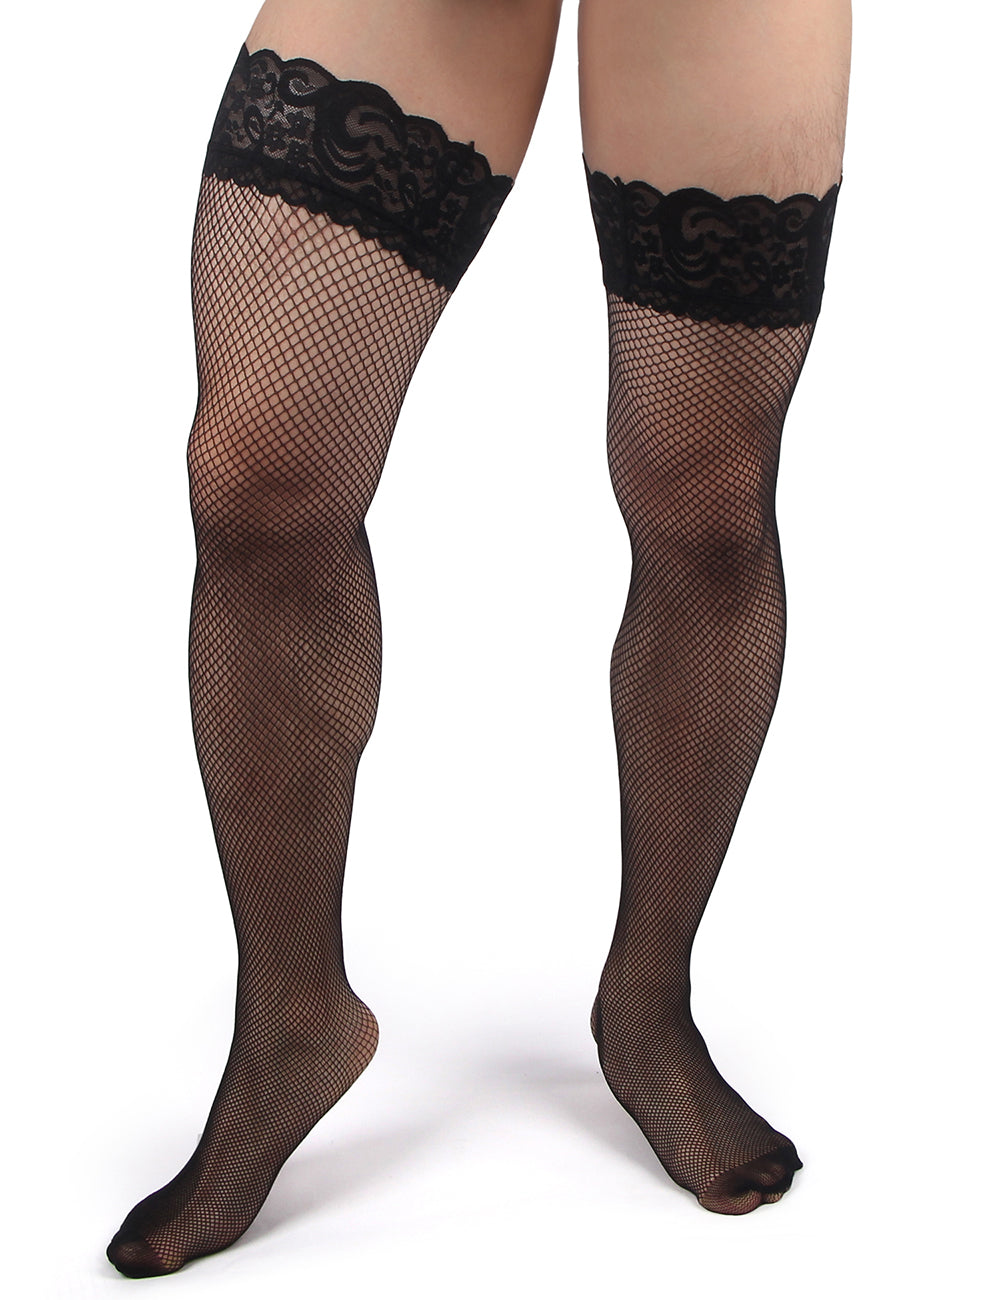 Unisex Fishnet Lace Top Stockings, Strong for Our Males to Wear! Black